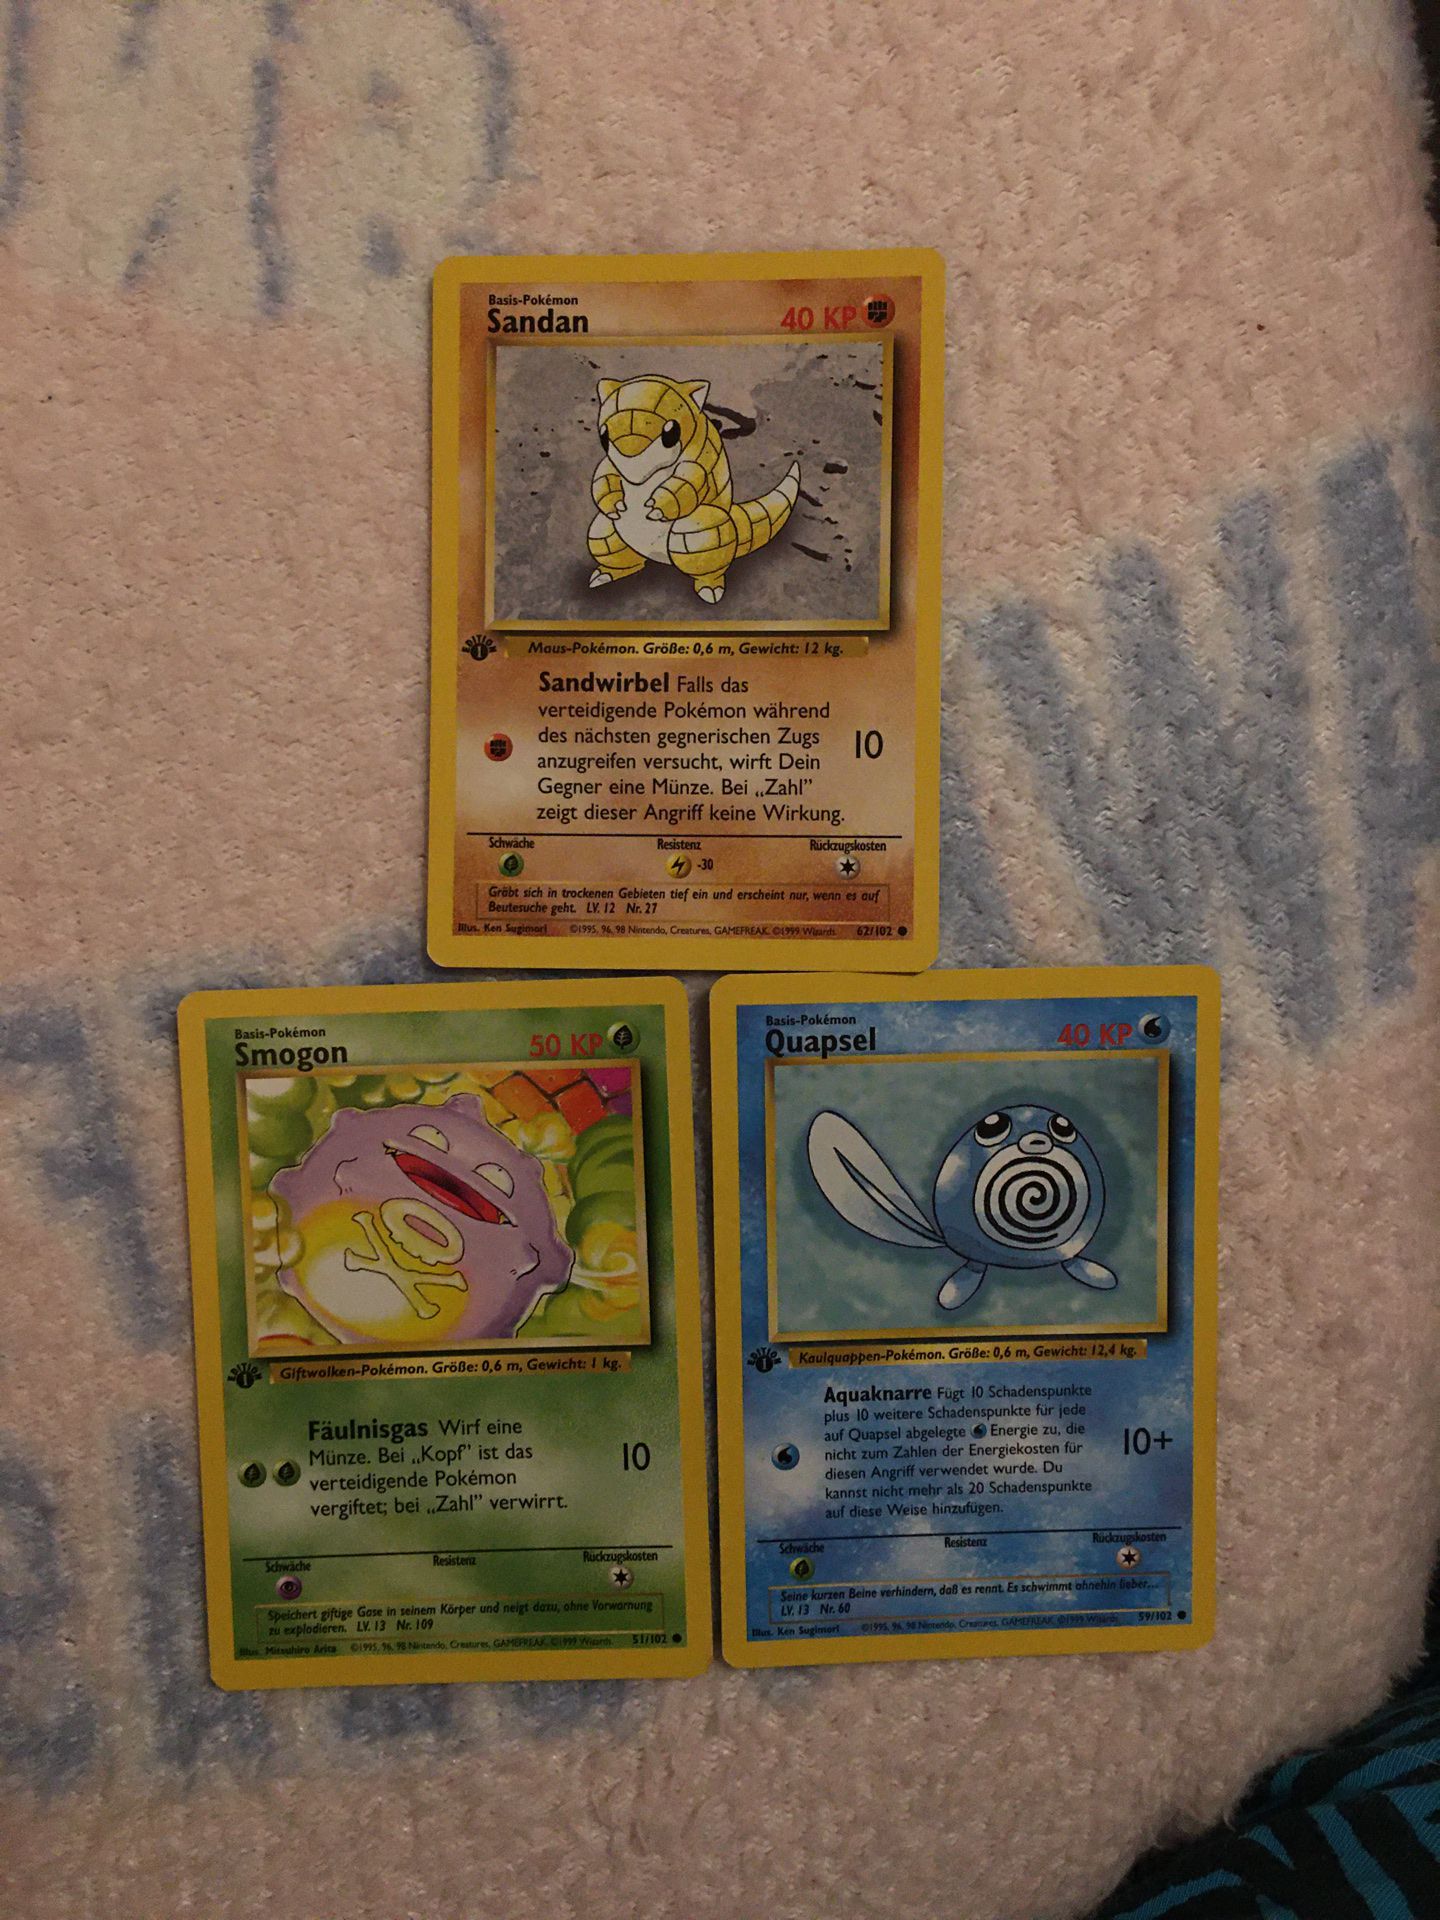 3 1st Edition German Pokemon Cards Mint condition